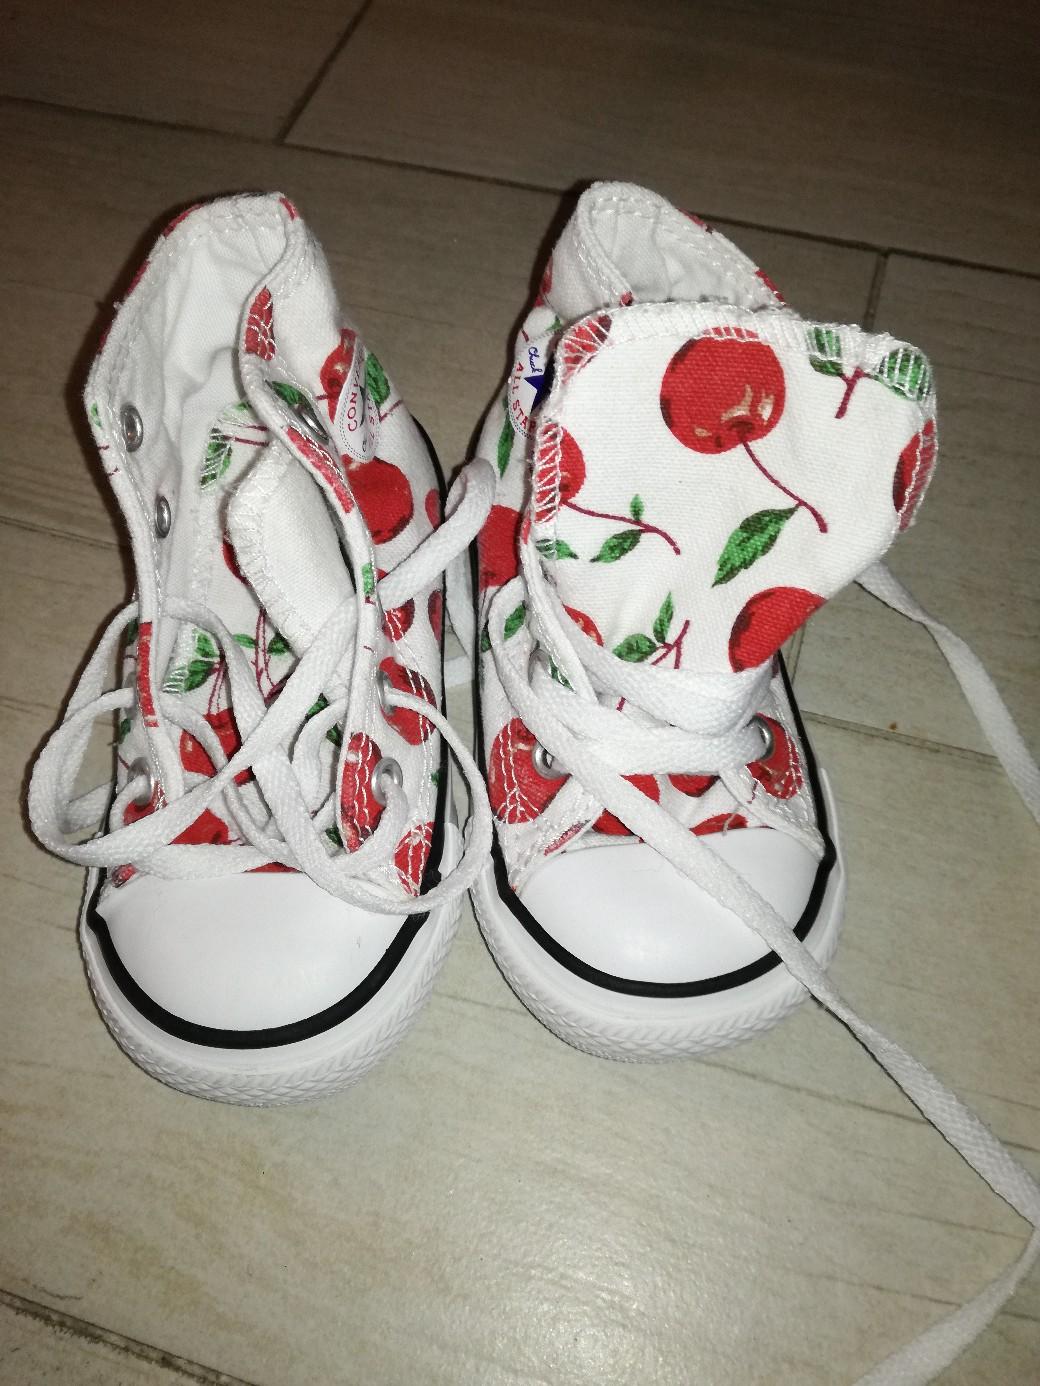 converse All Star bambina n.22 in 20037 Paderno Dugnano for €35.00 for sale  | Shpock